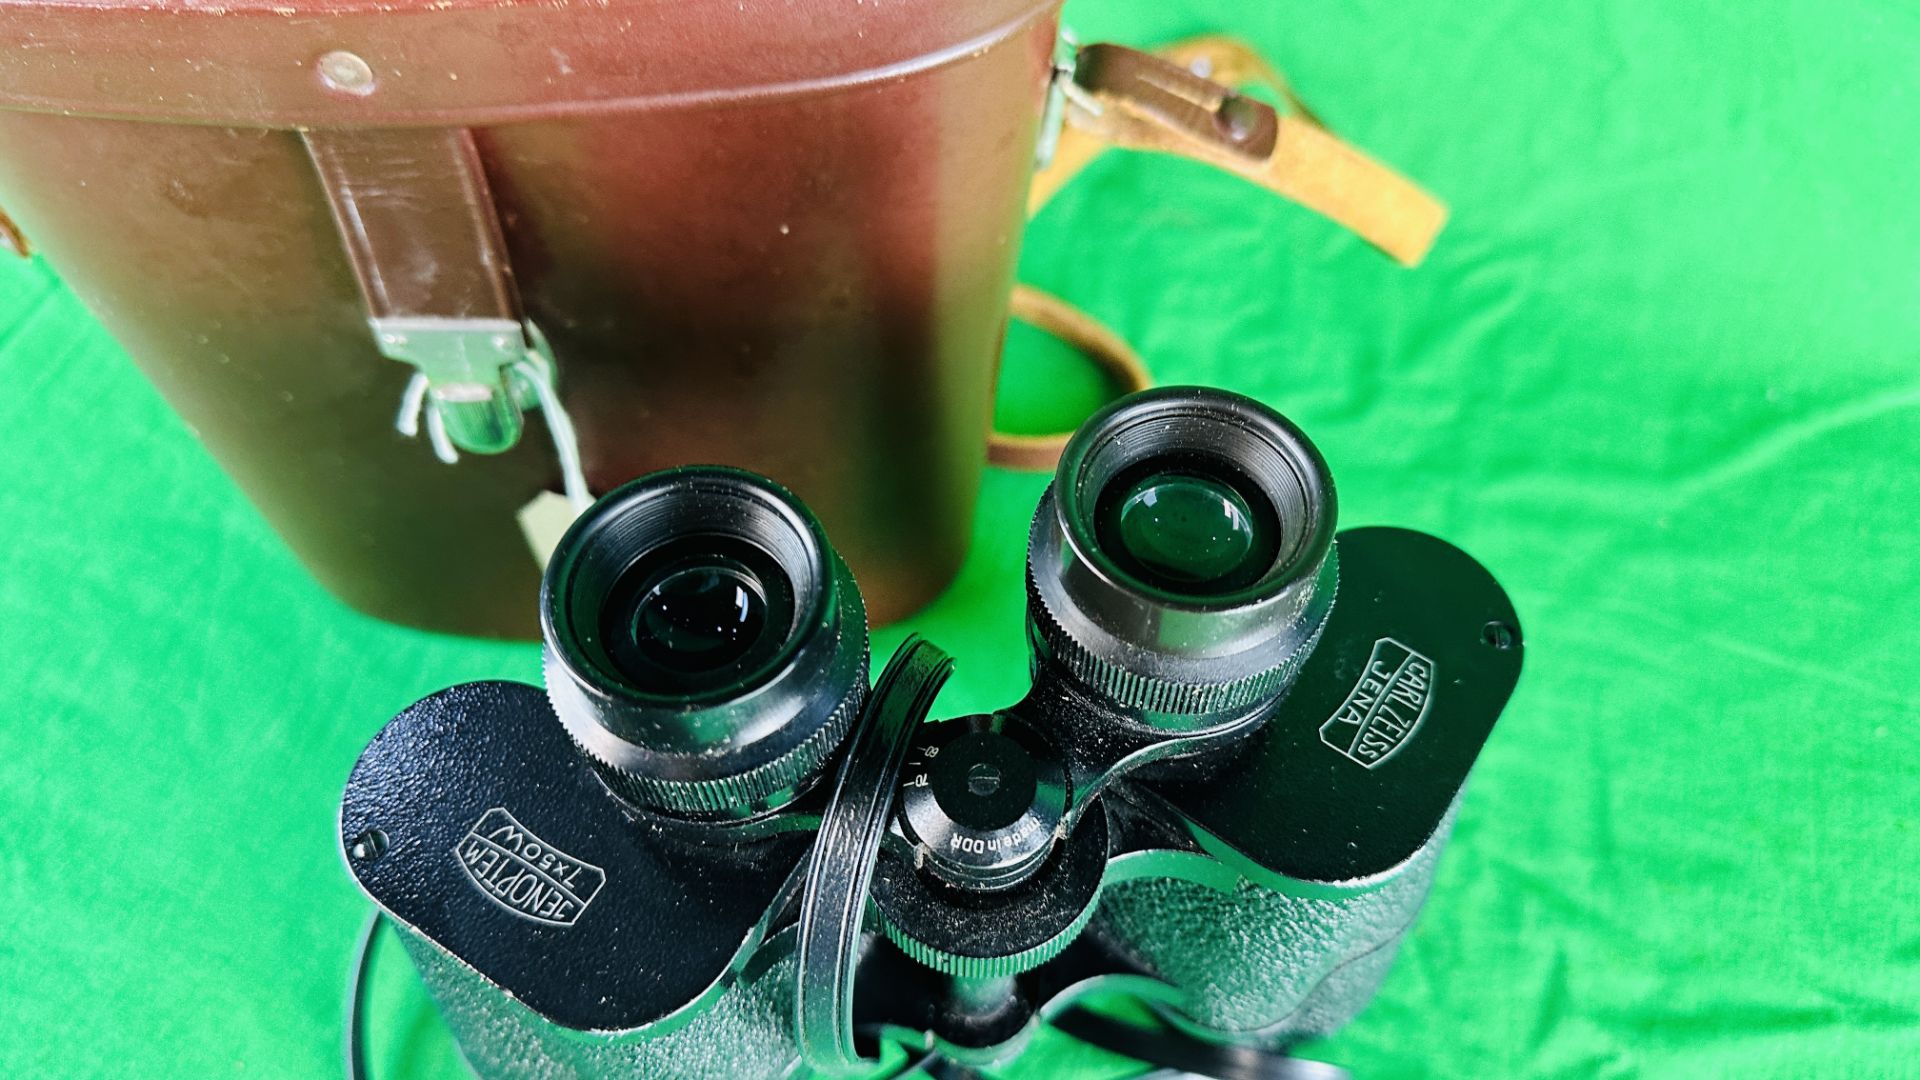 PAIR OF CARL ZEISS JENOPTEM 7X50 W BINOCULARS IN LEATHERED CASE - Image 2 of 4